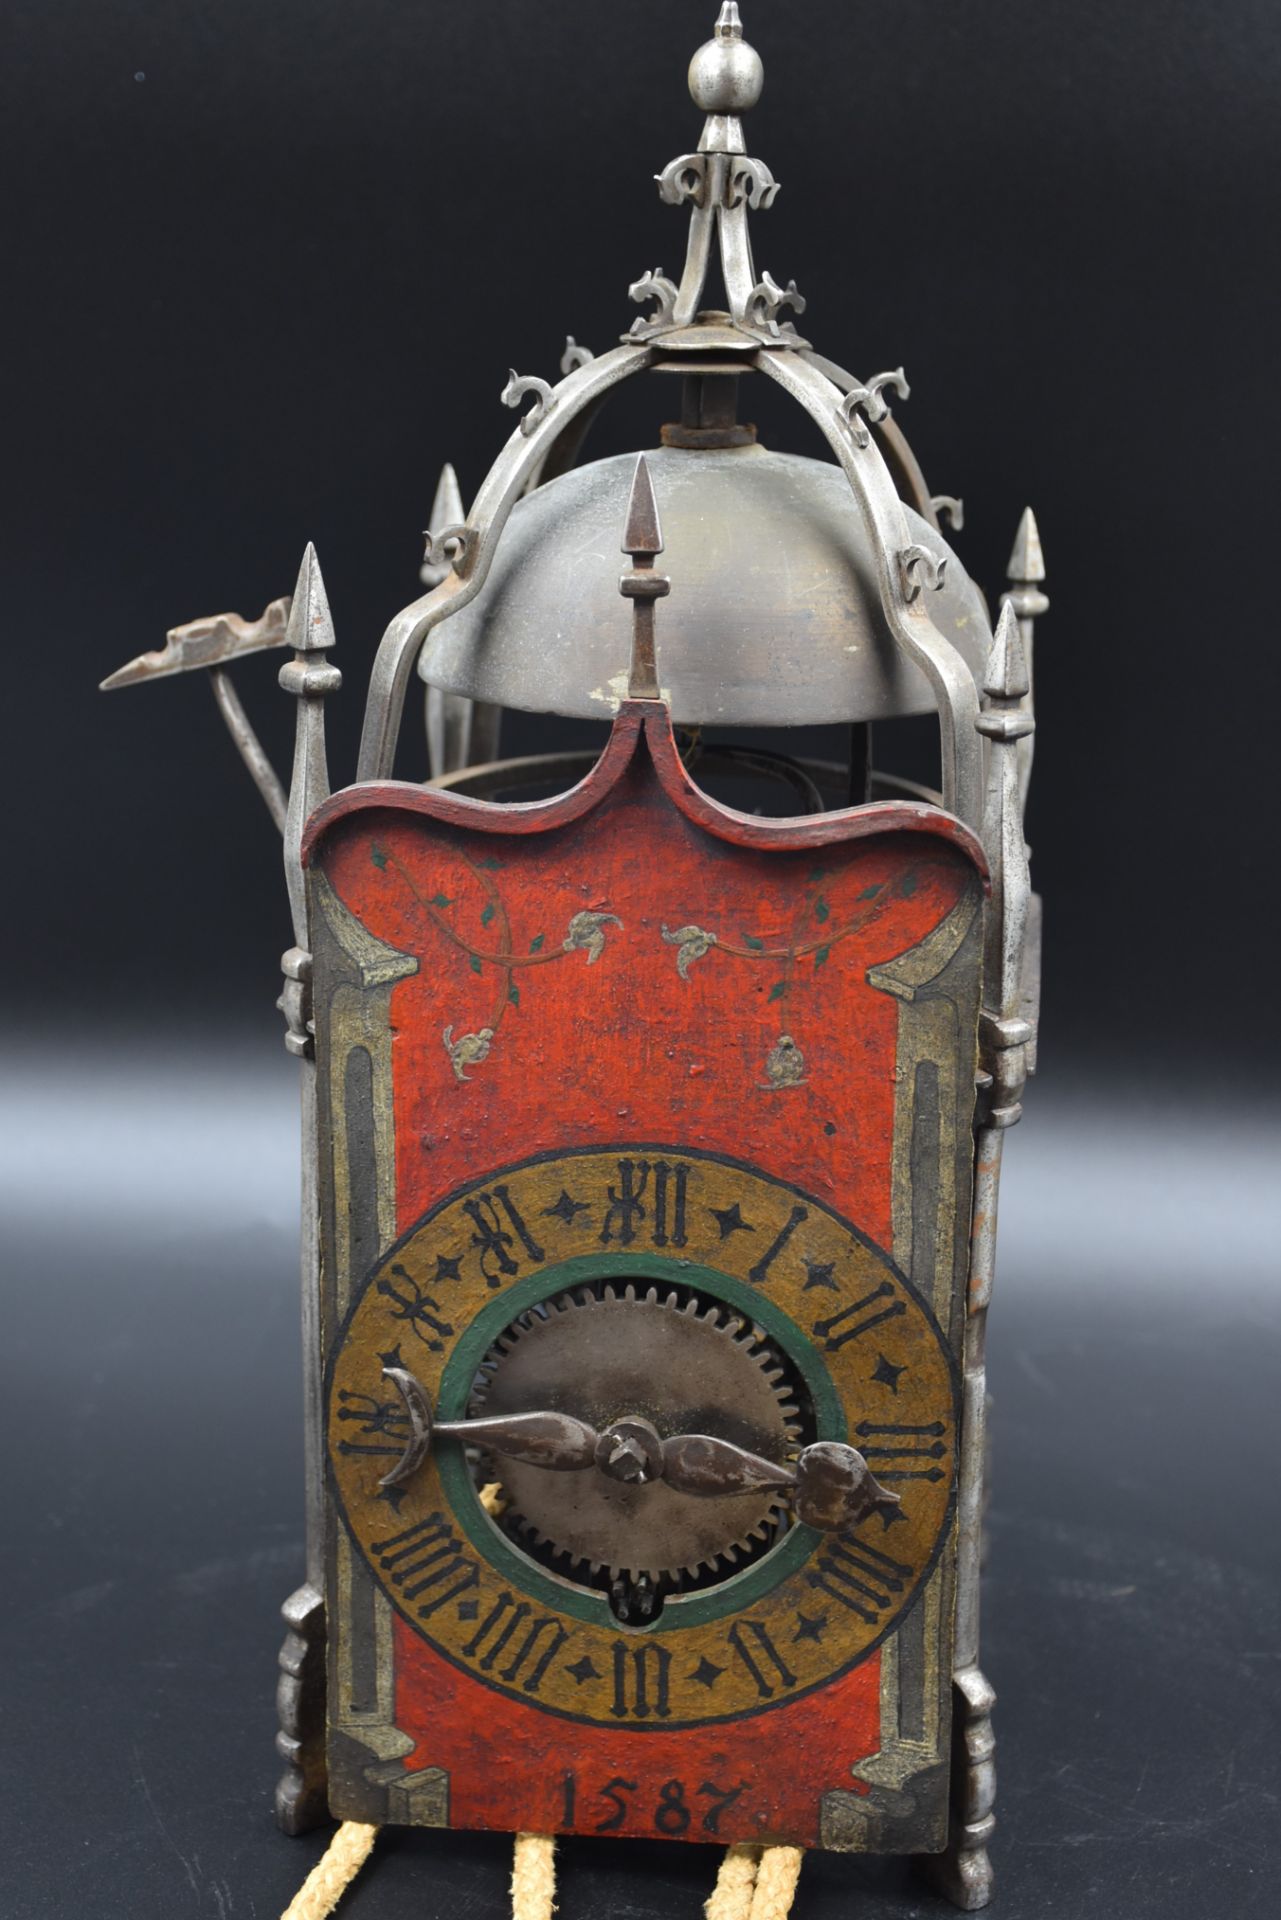 Iron lantern clock with painted dial and dated 1587 Switzerland, Winterthur. Attributed to Earhart - Image 2 of 4